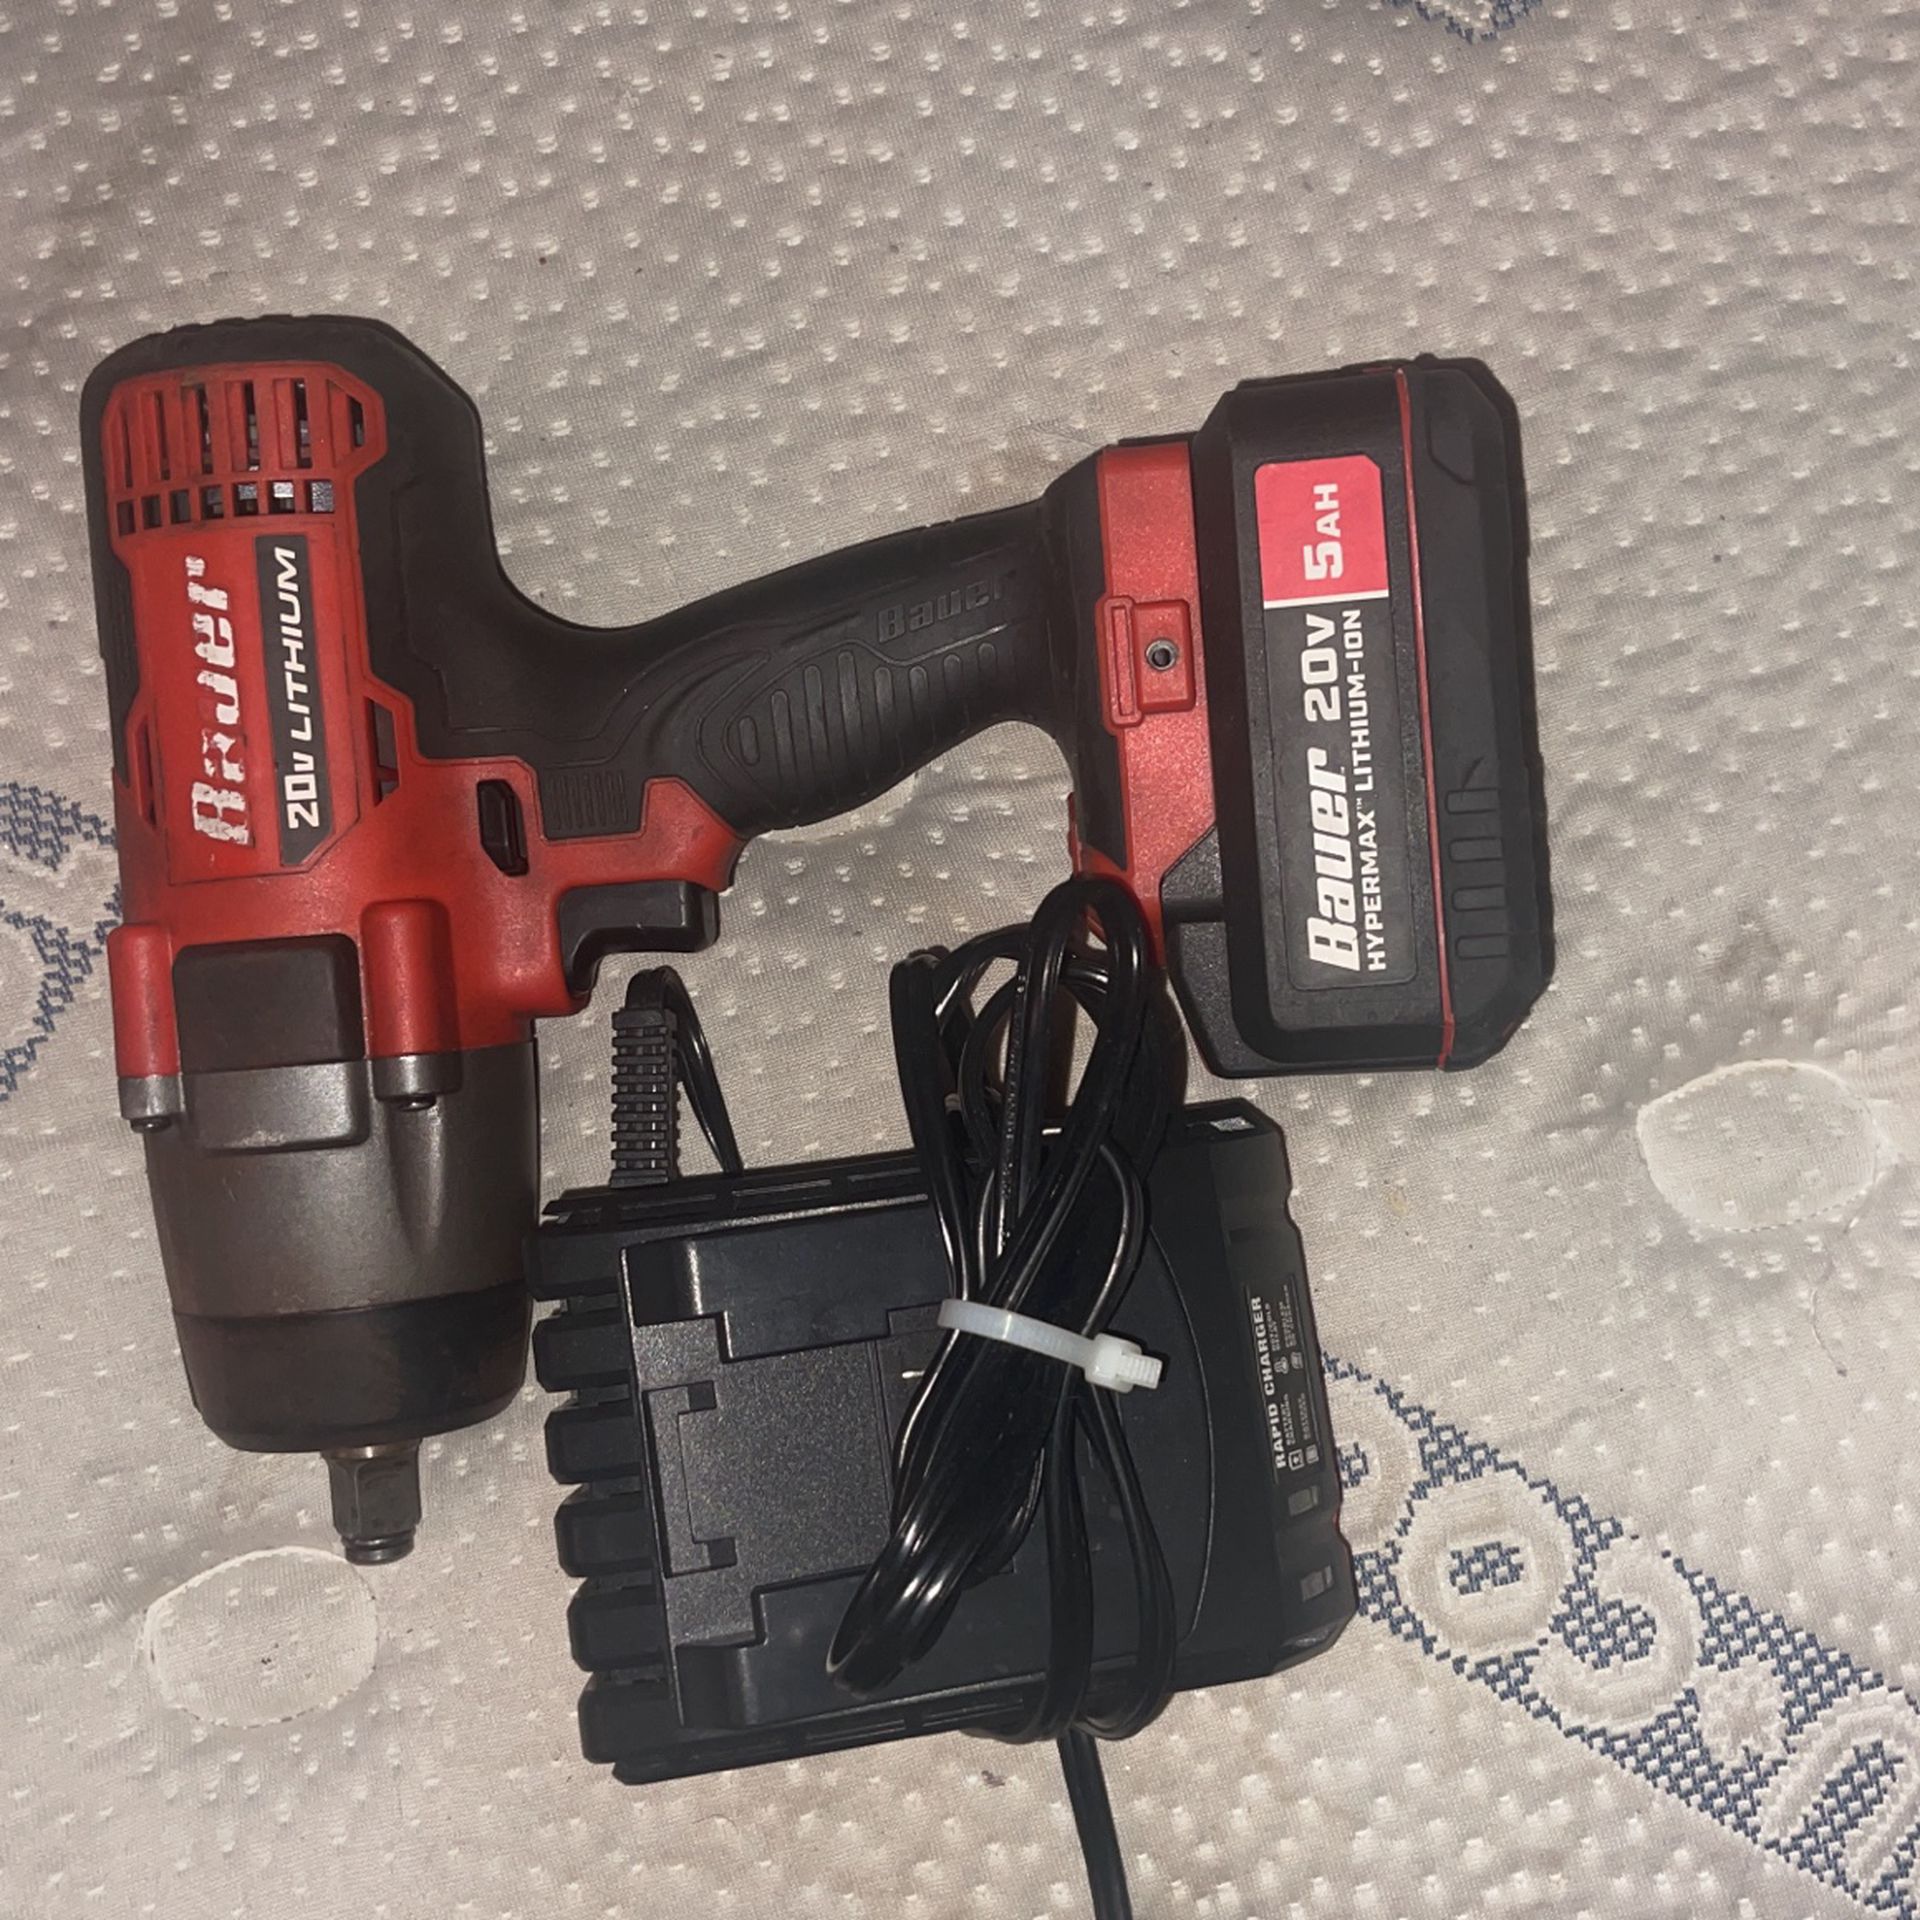 Baoer 1/2 impact with battery and charger 